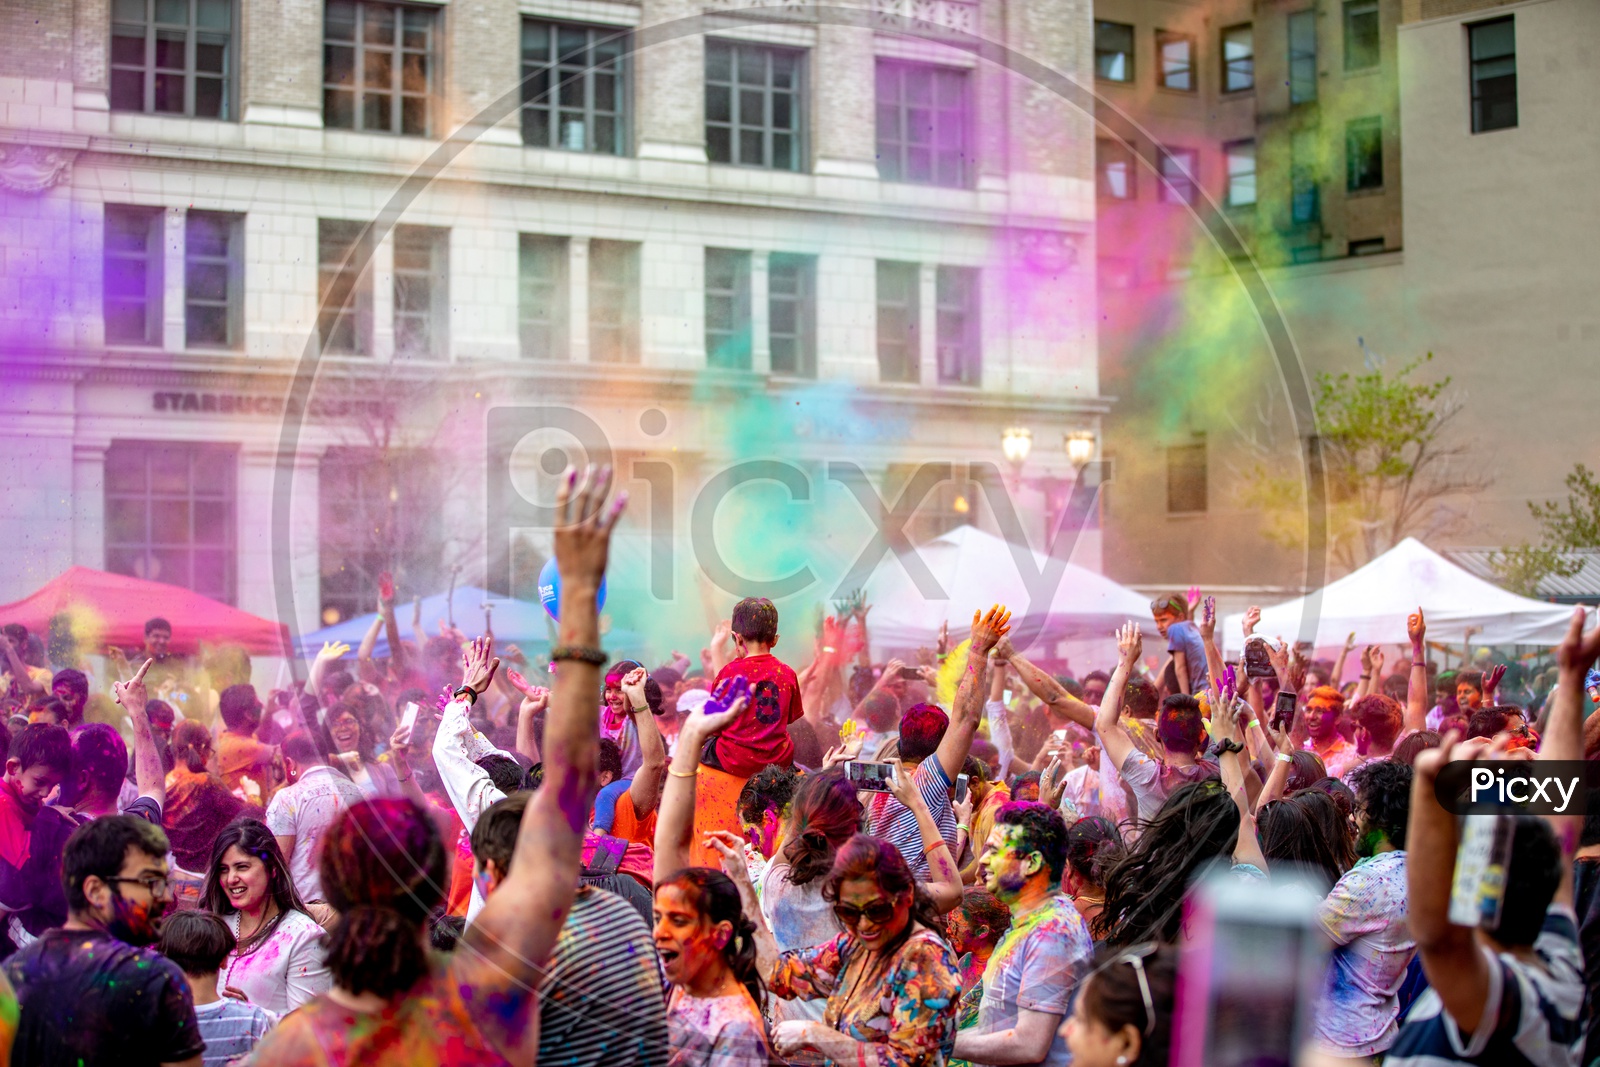 Holi Celebrations - Indian Festival - Colors/Colorful in USA